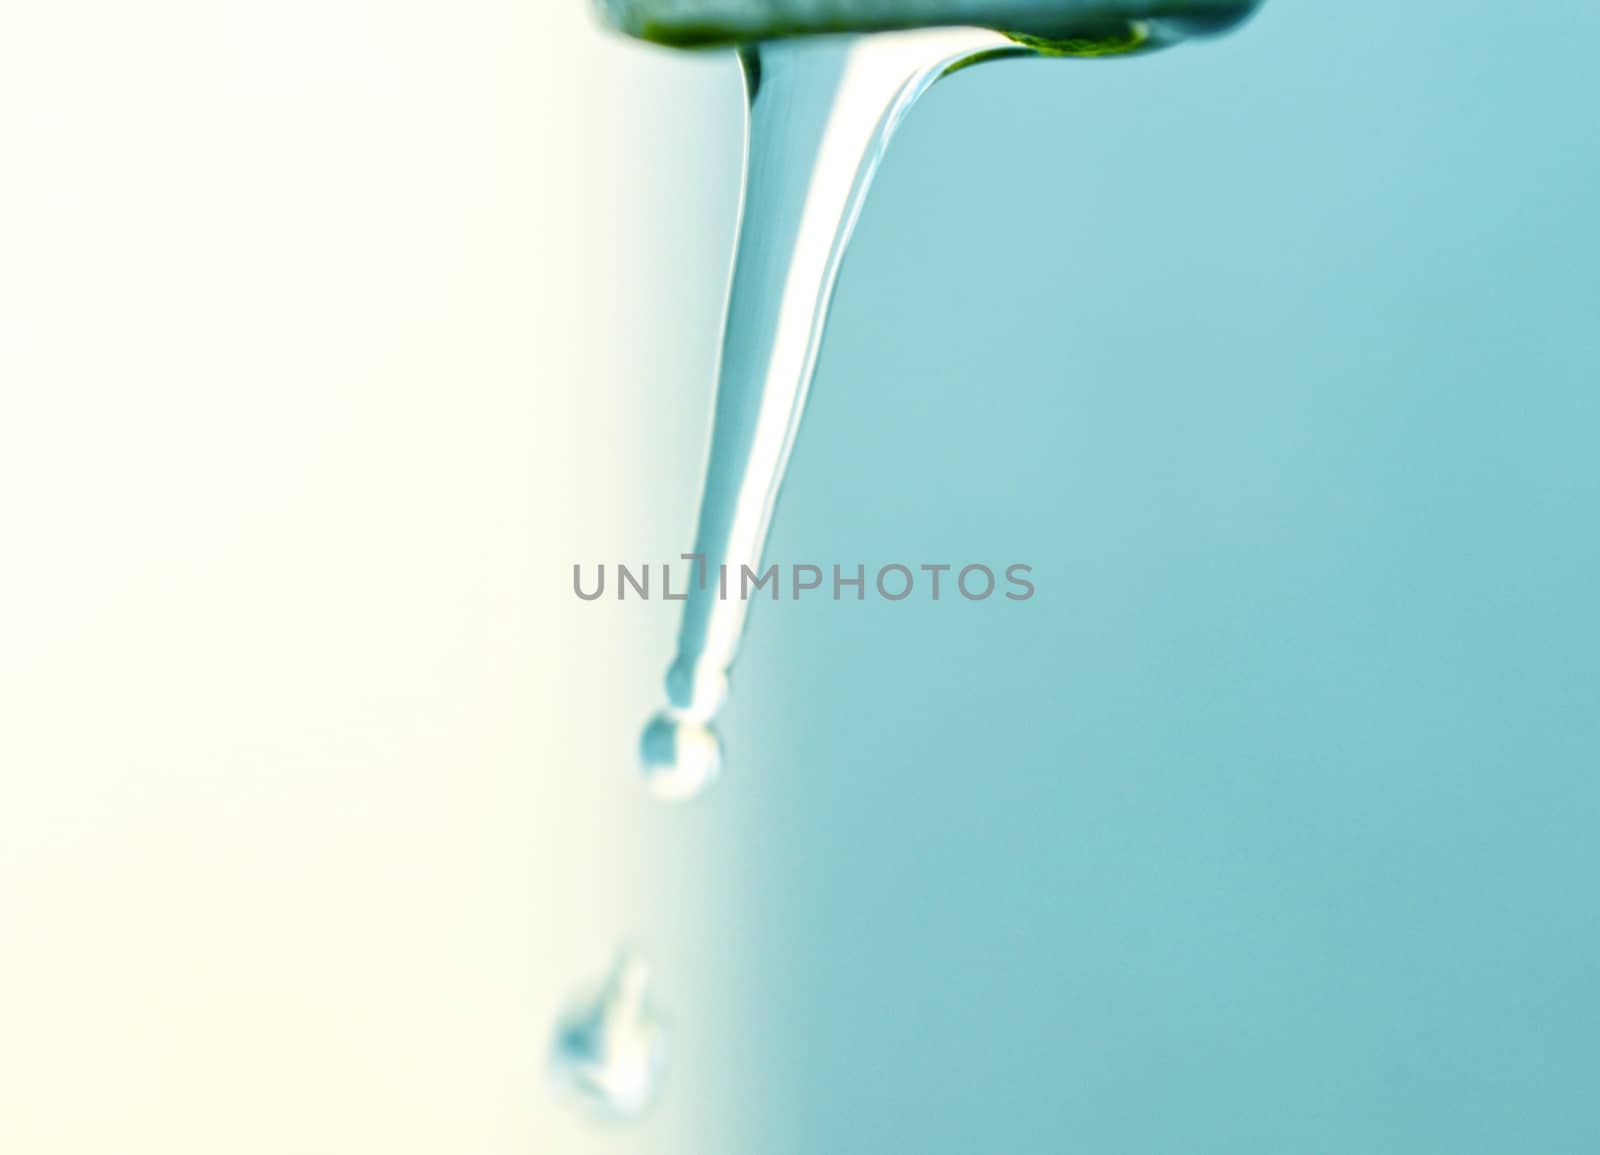 Tap of running water  on grey background